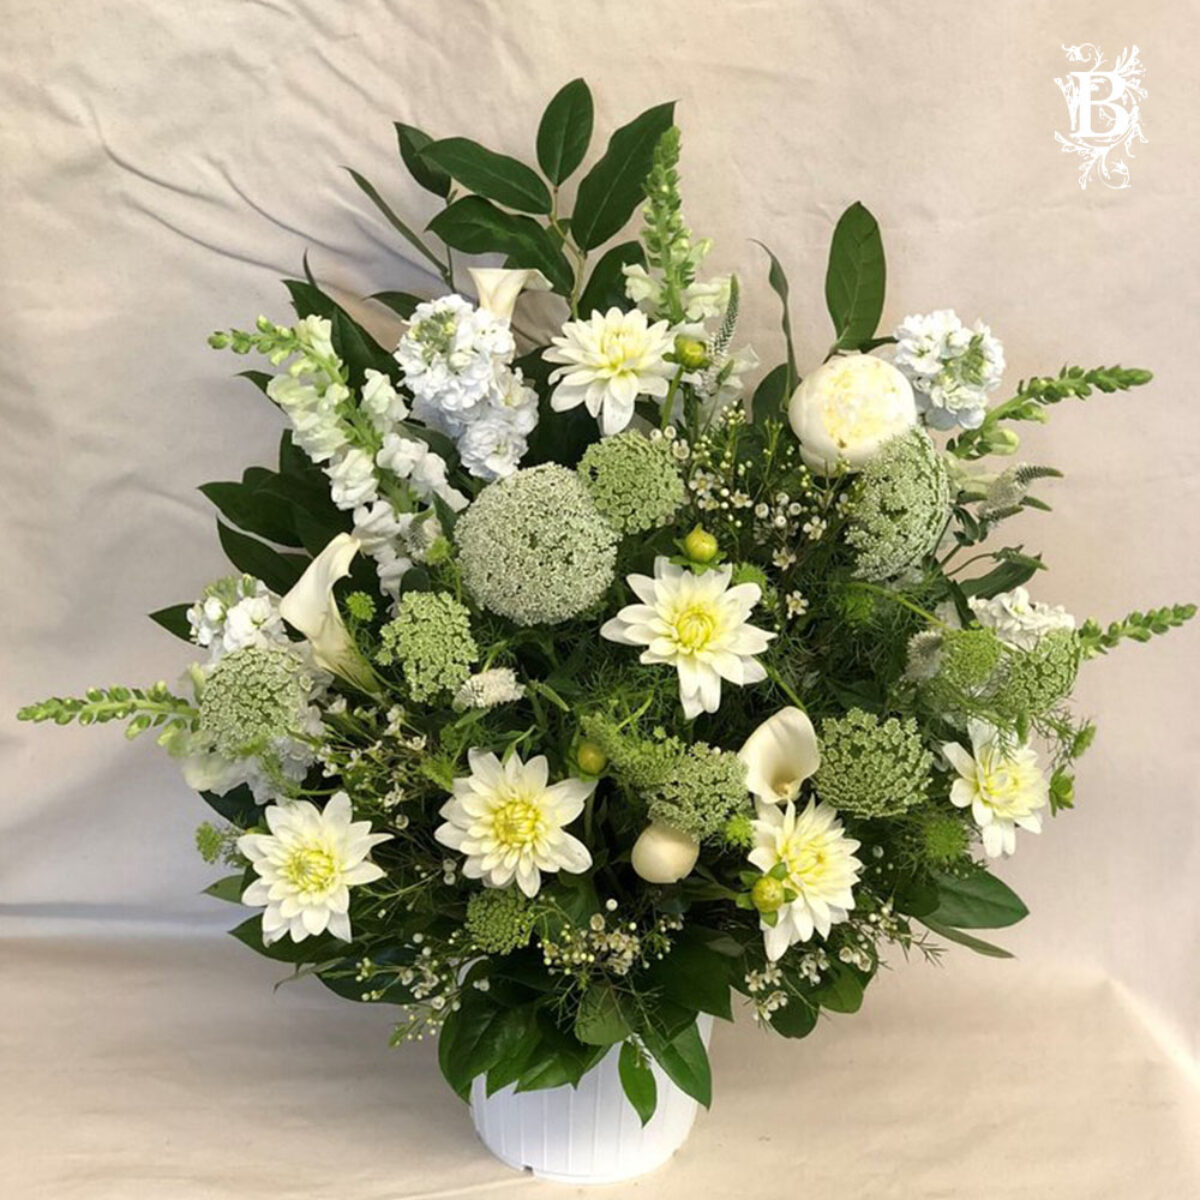 funeral flowers meaning